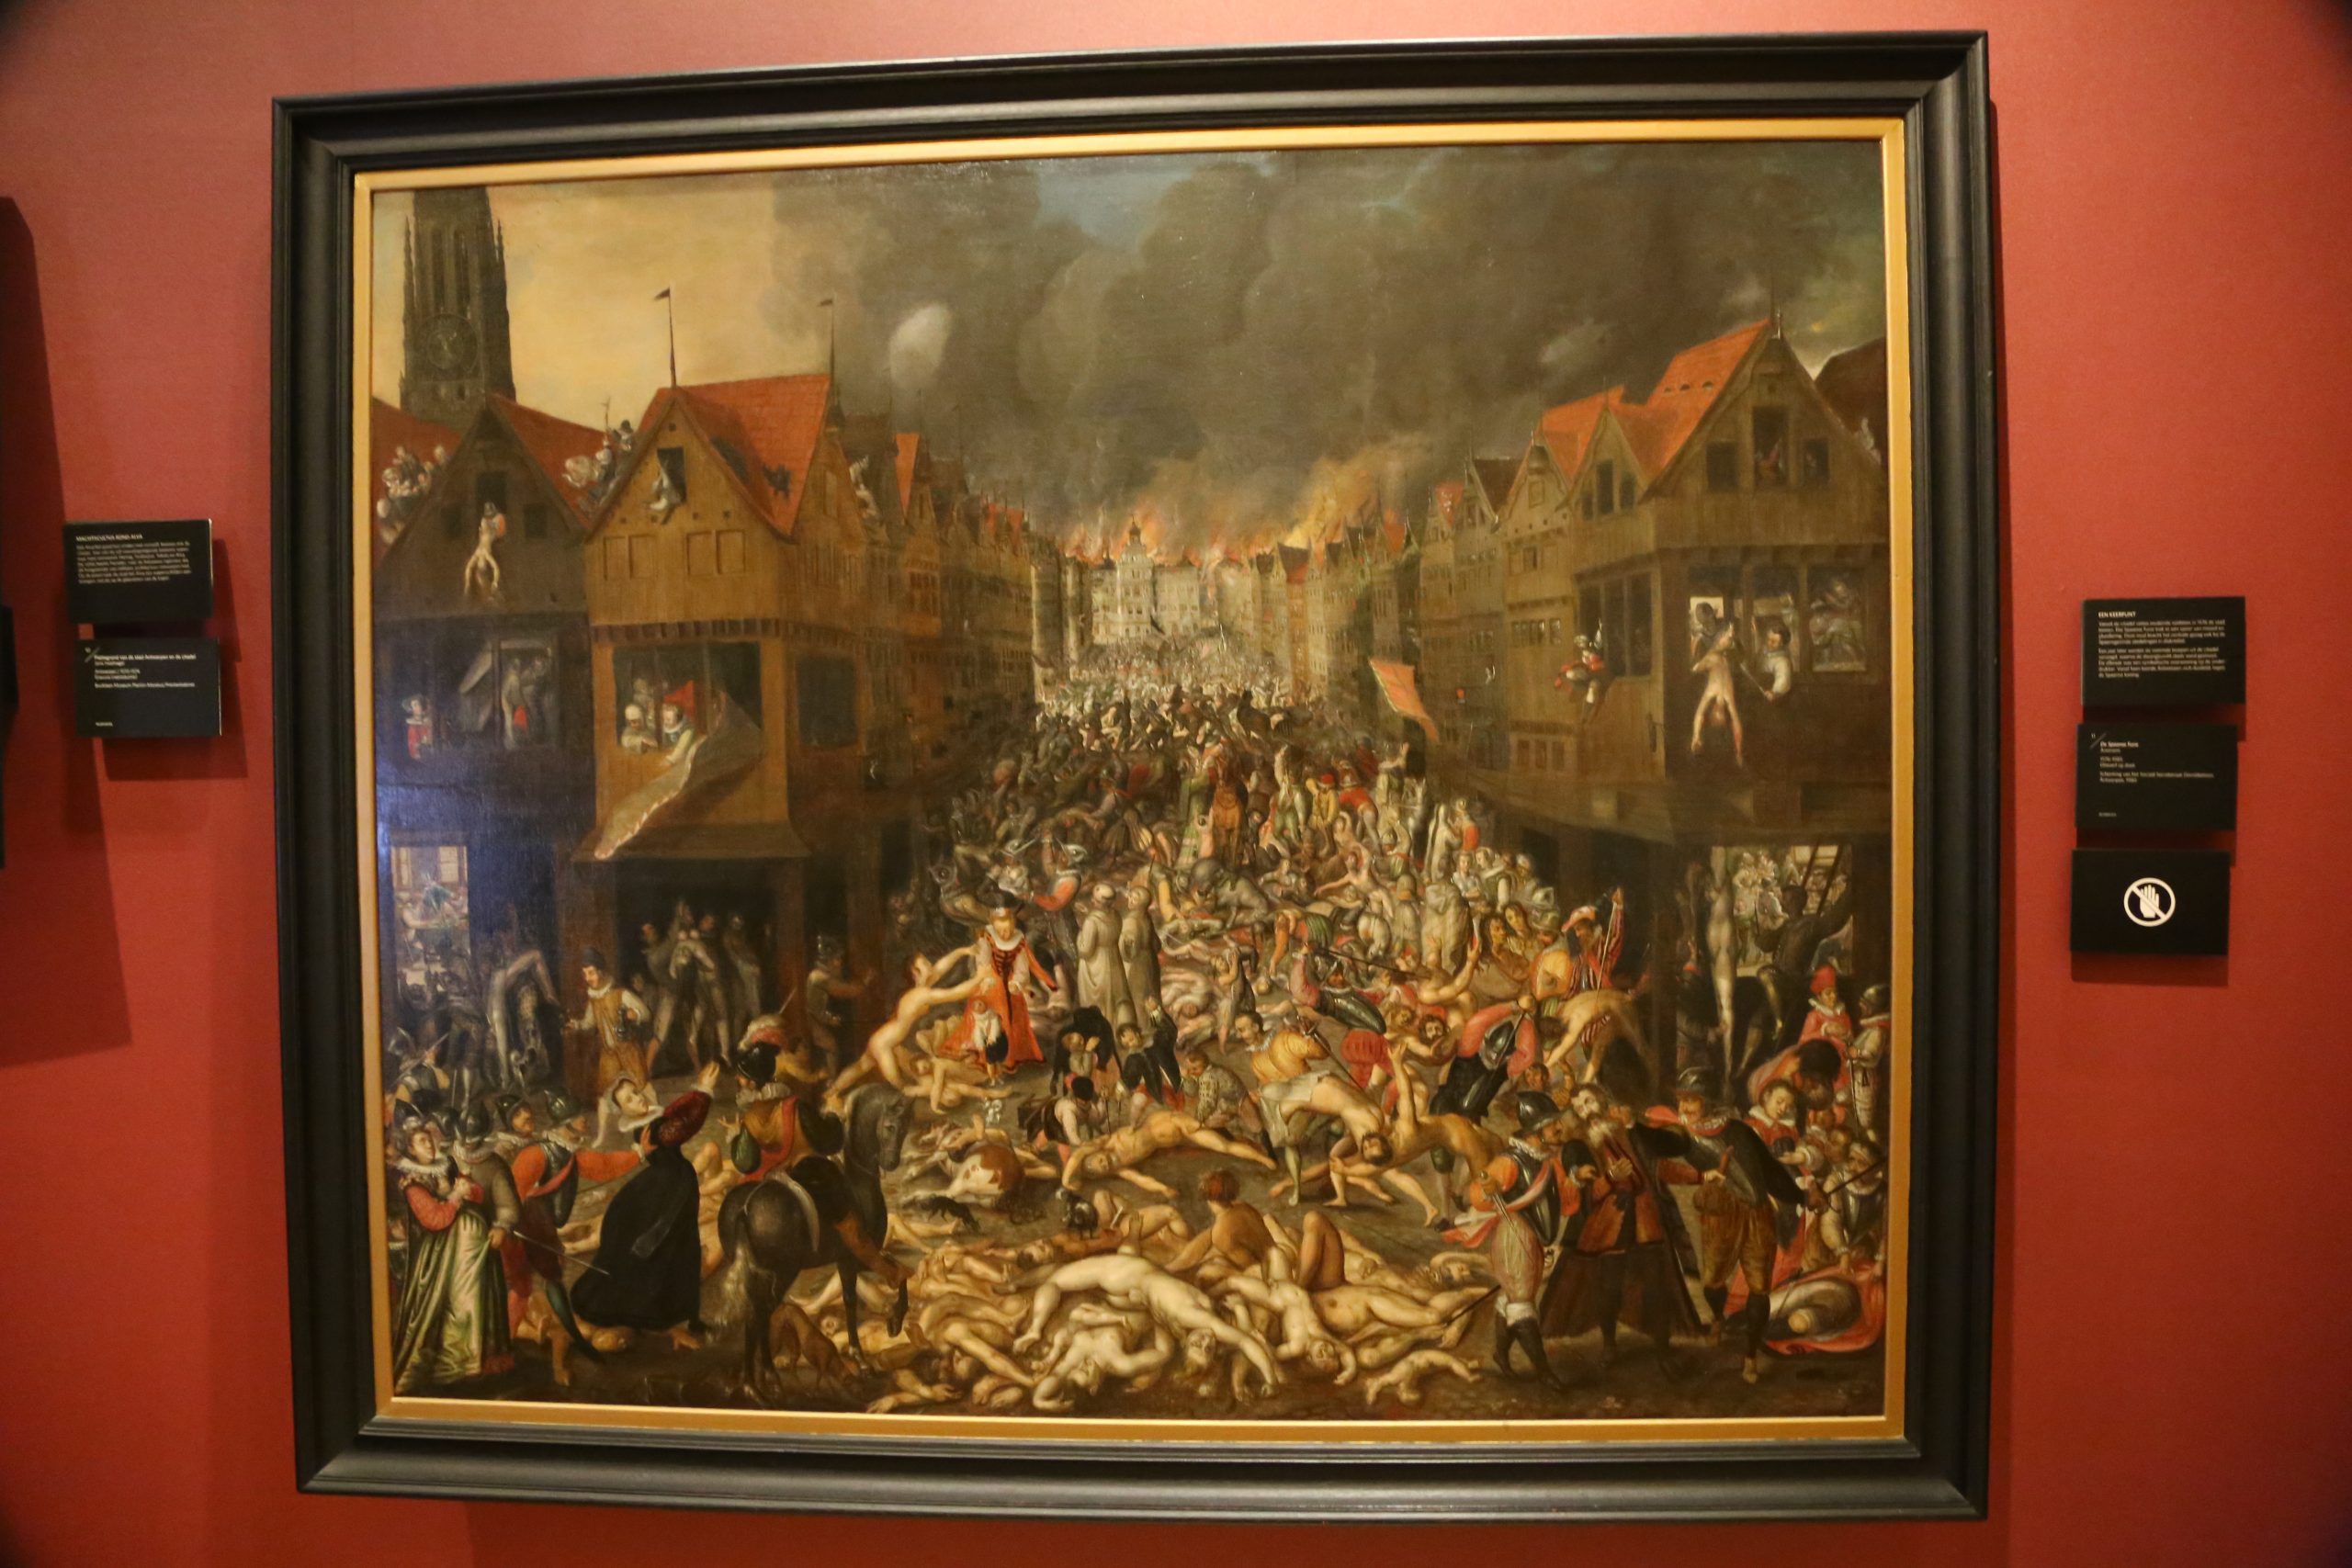 The Sack of Antwerp, often known as the Spanish Fury at Antwerp